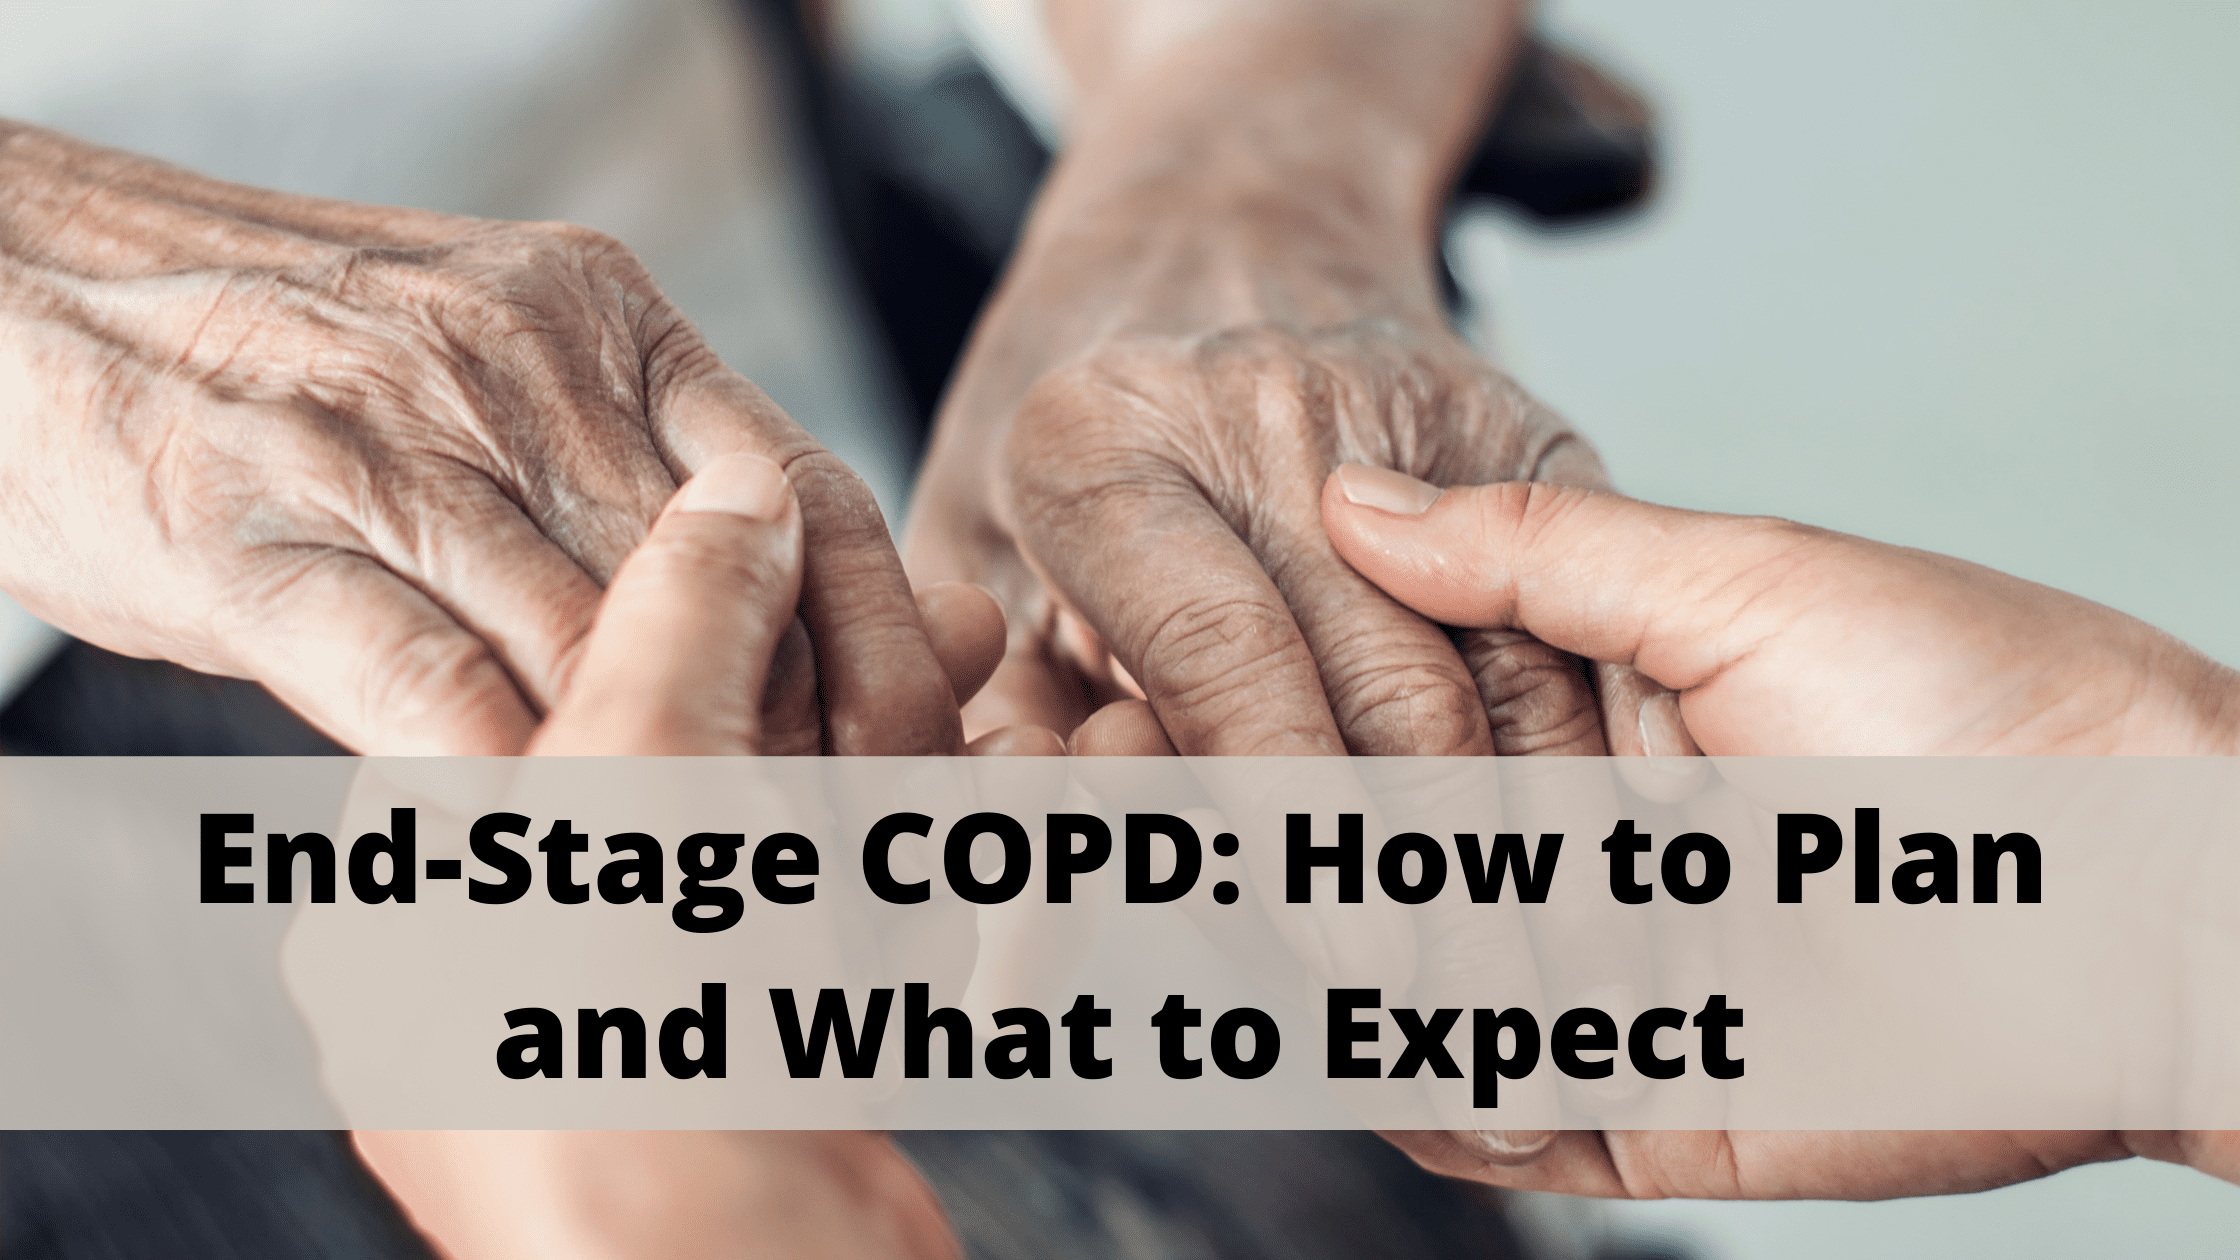 End-Stage COPD: How to Plan and What to Expect